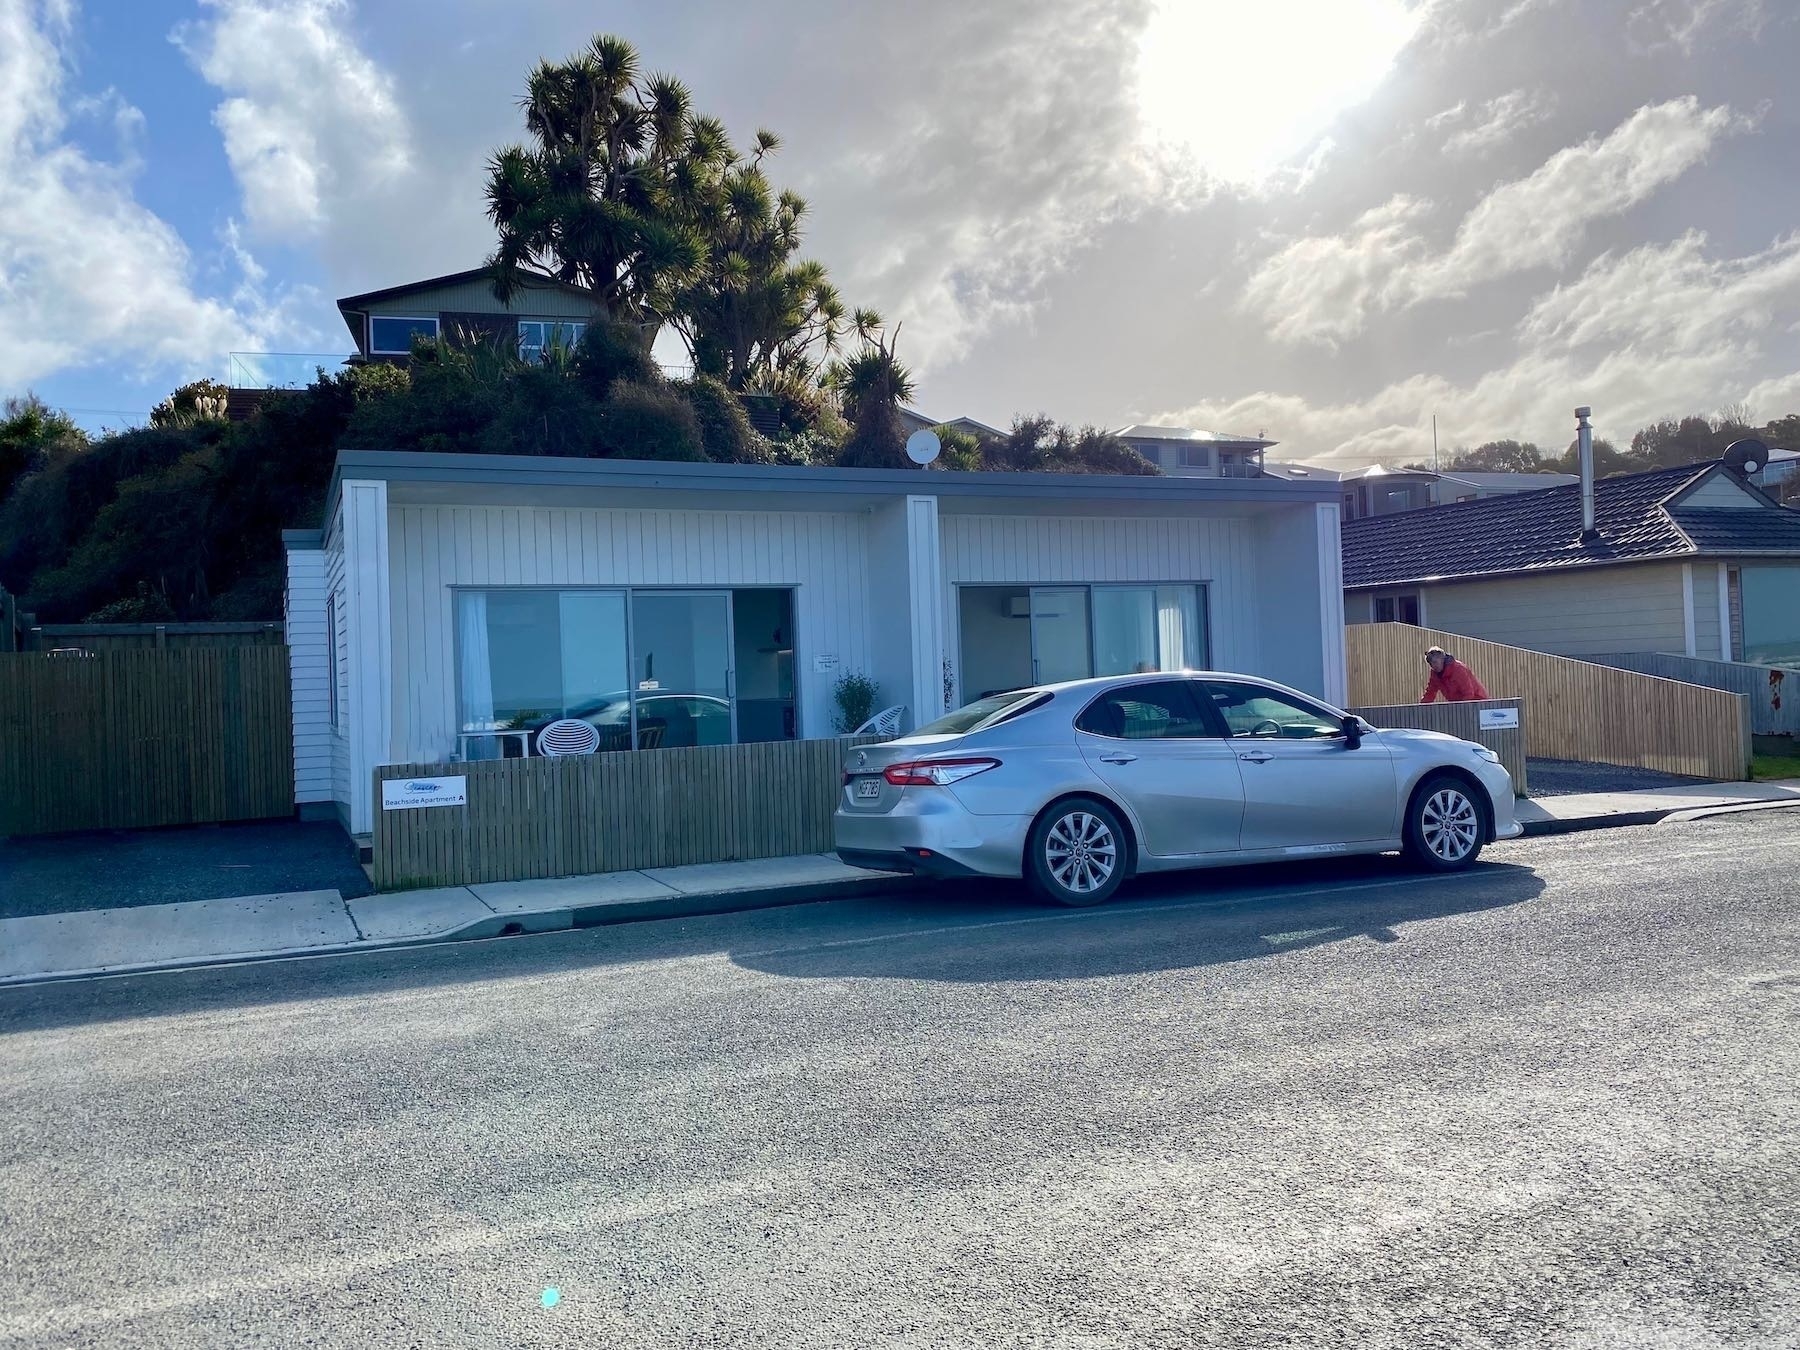 Seascape Motel — 2 units with rental car in front. 